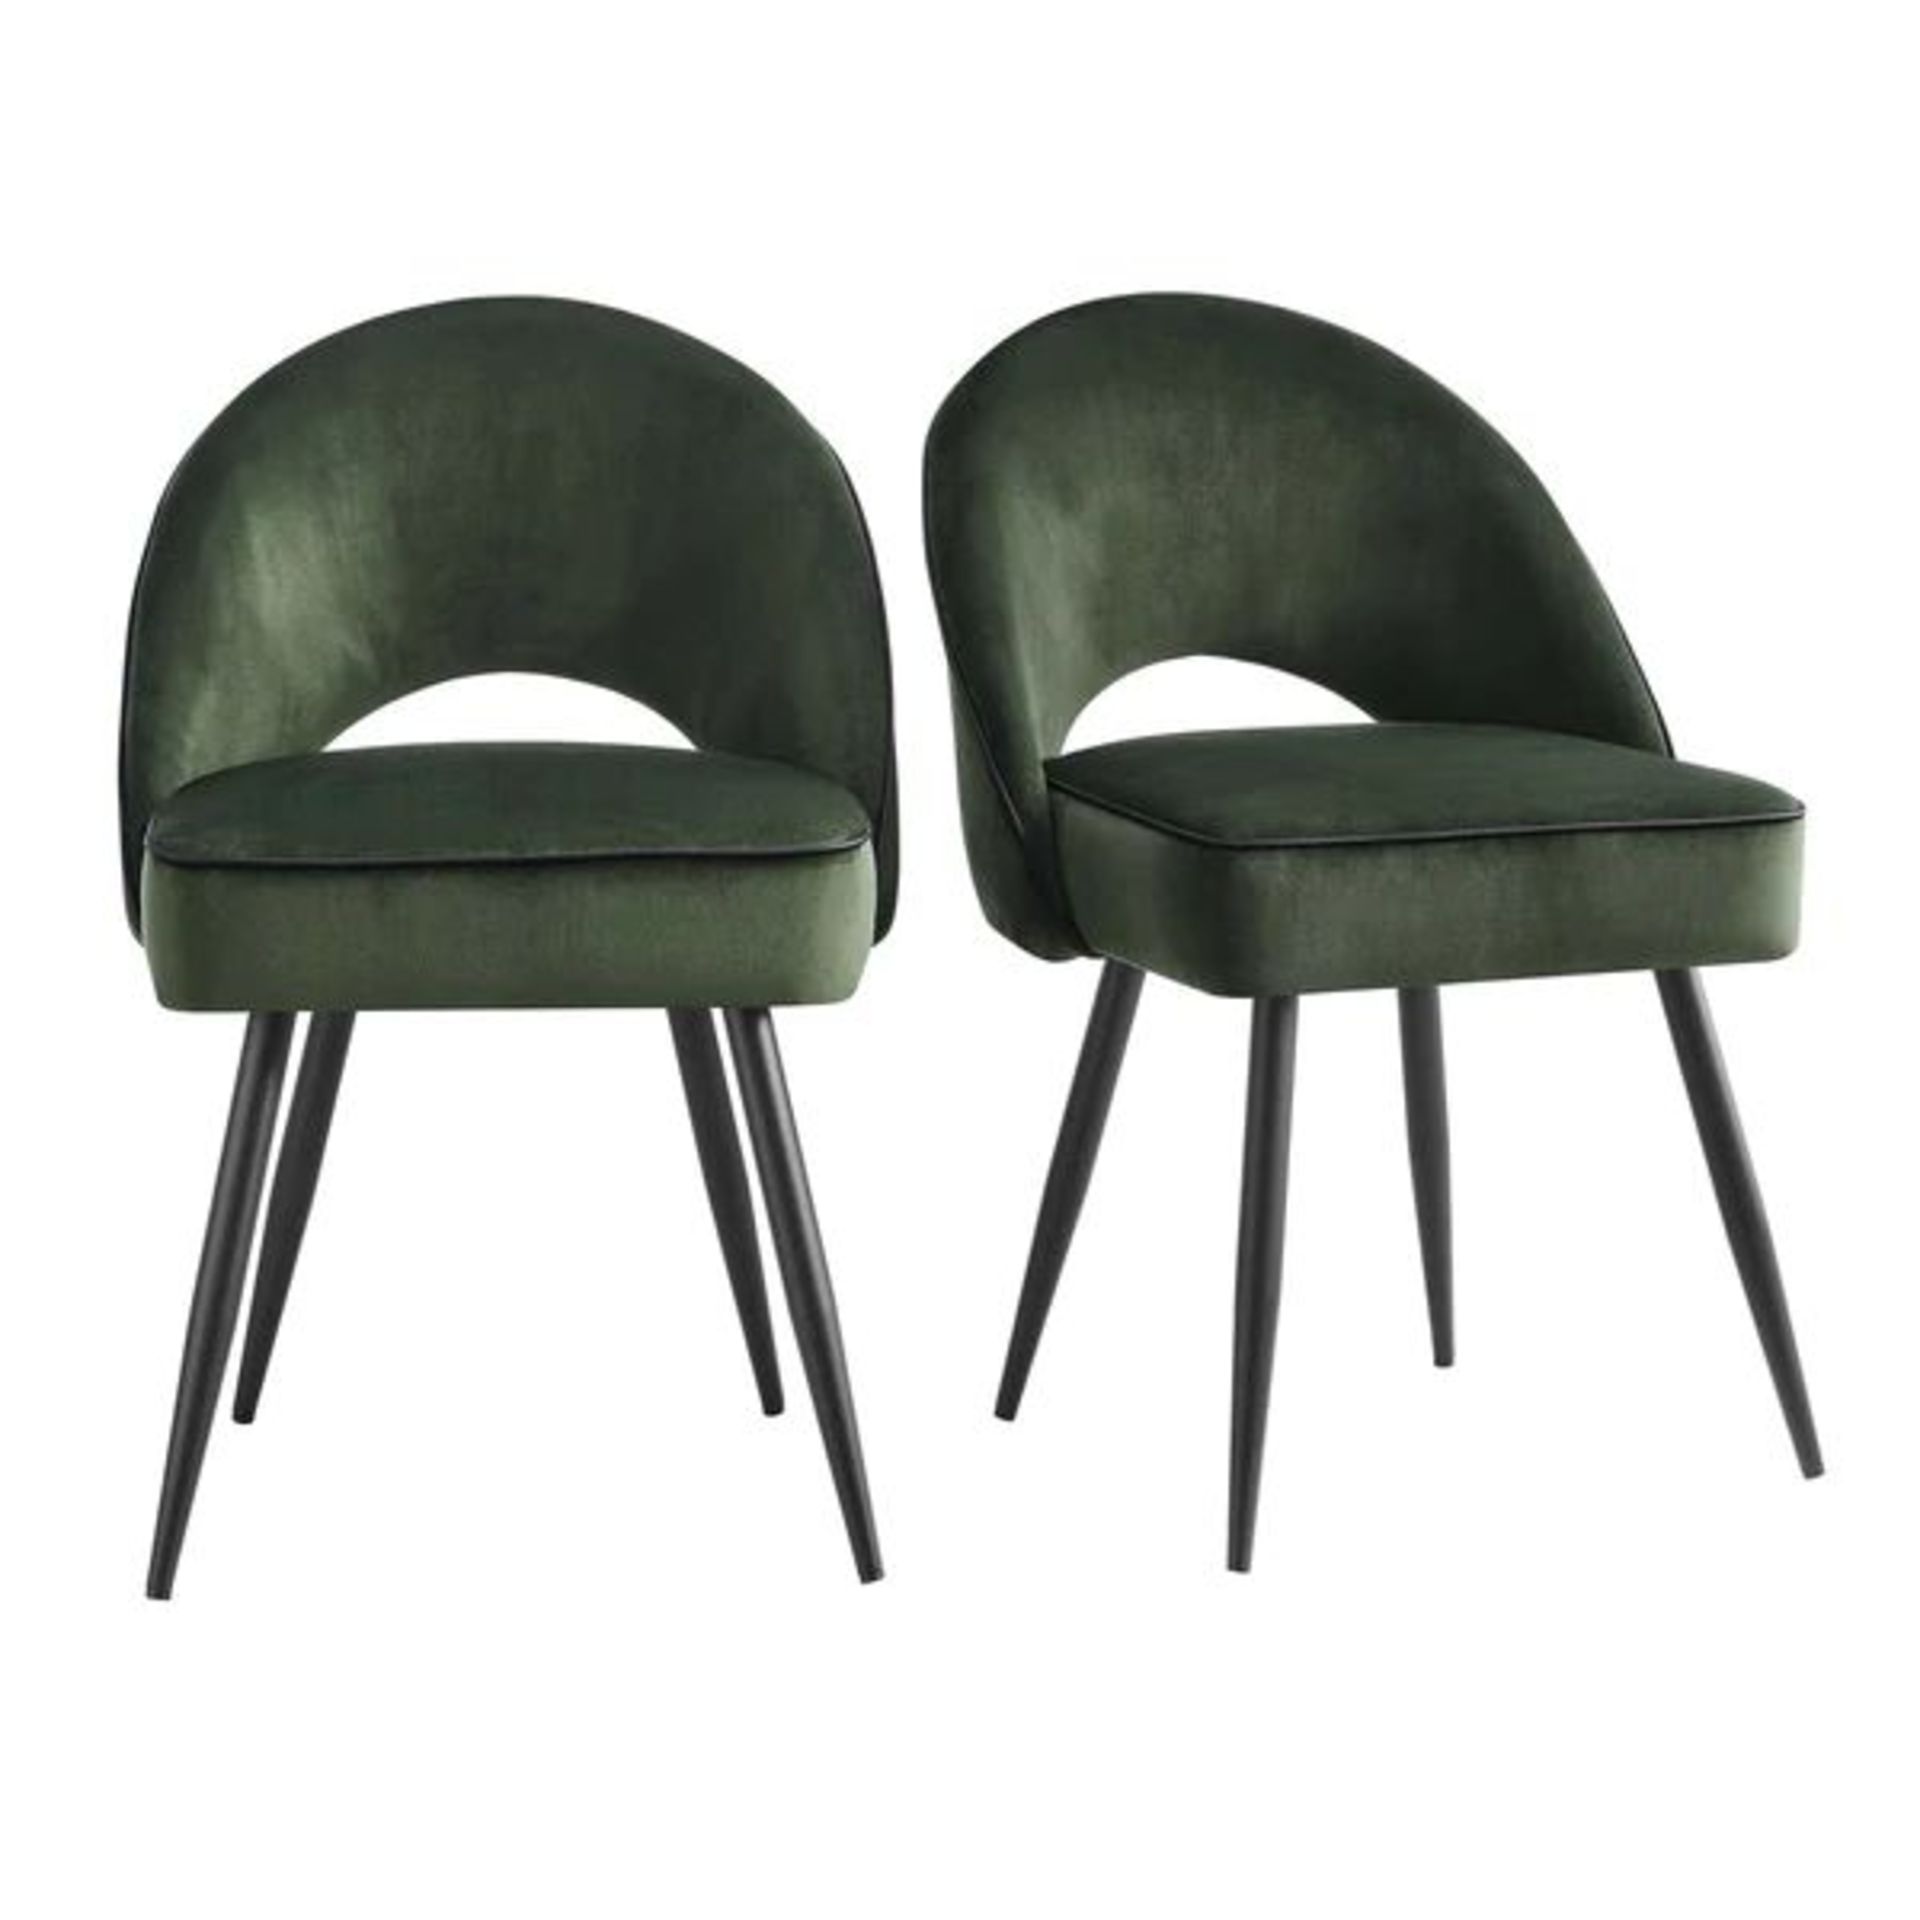 Oakley Set of 2 Dark Green Velvet Upholstered Dining Chairs with Contrast Piping. - ER29. RRP £289. - Image 2 of 4